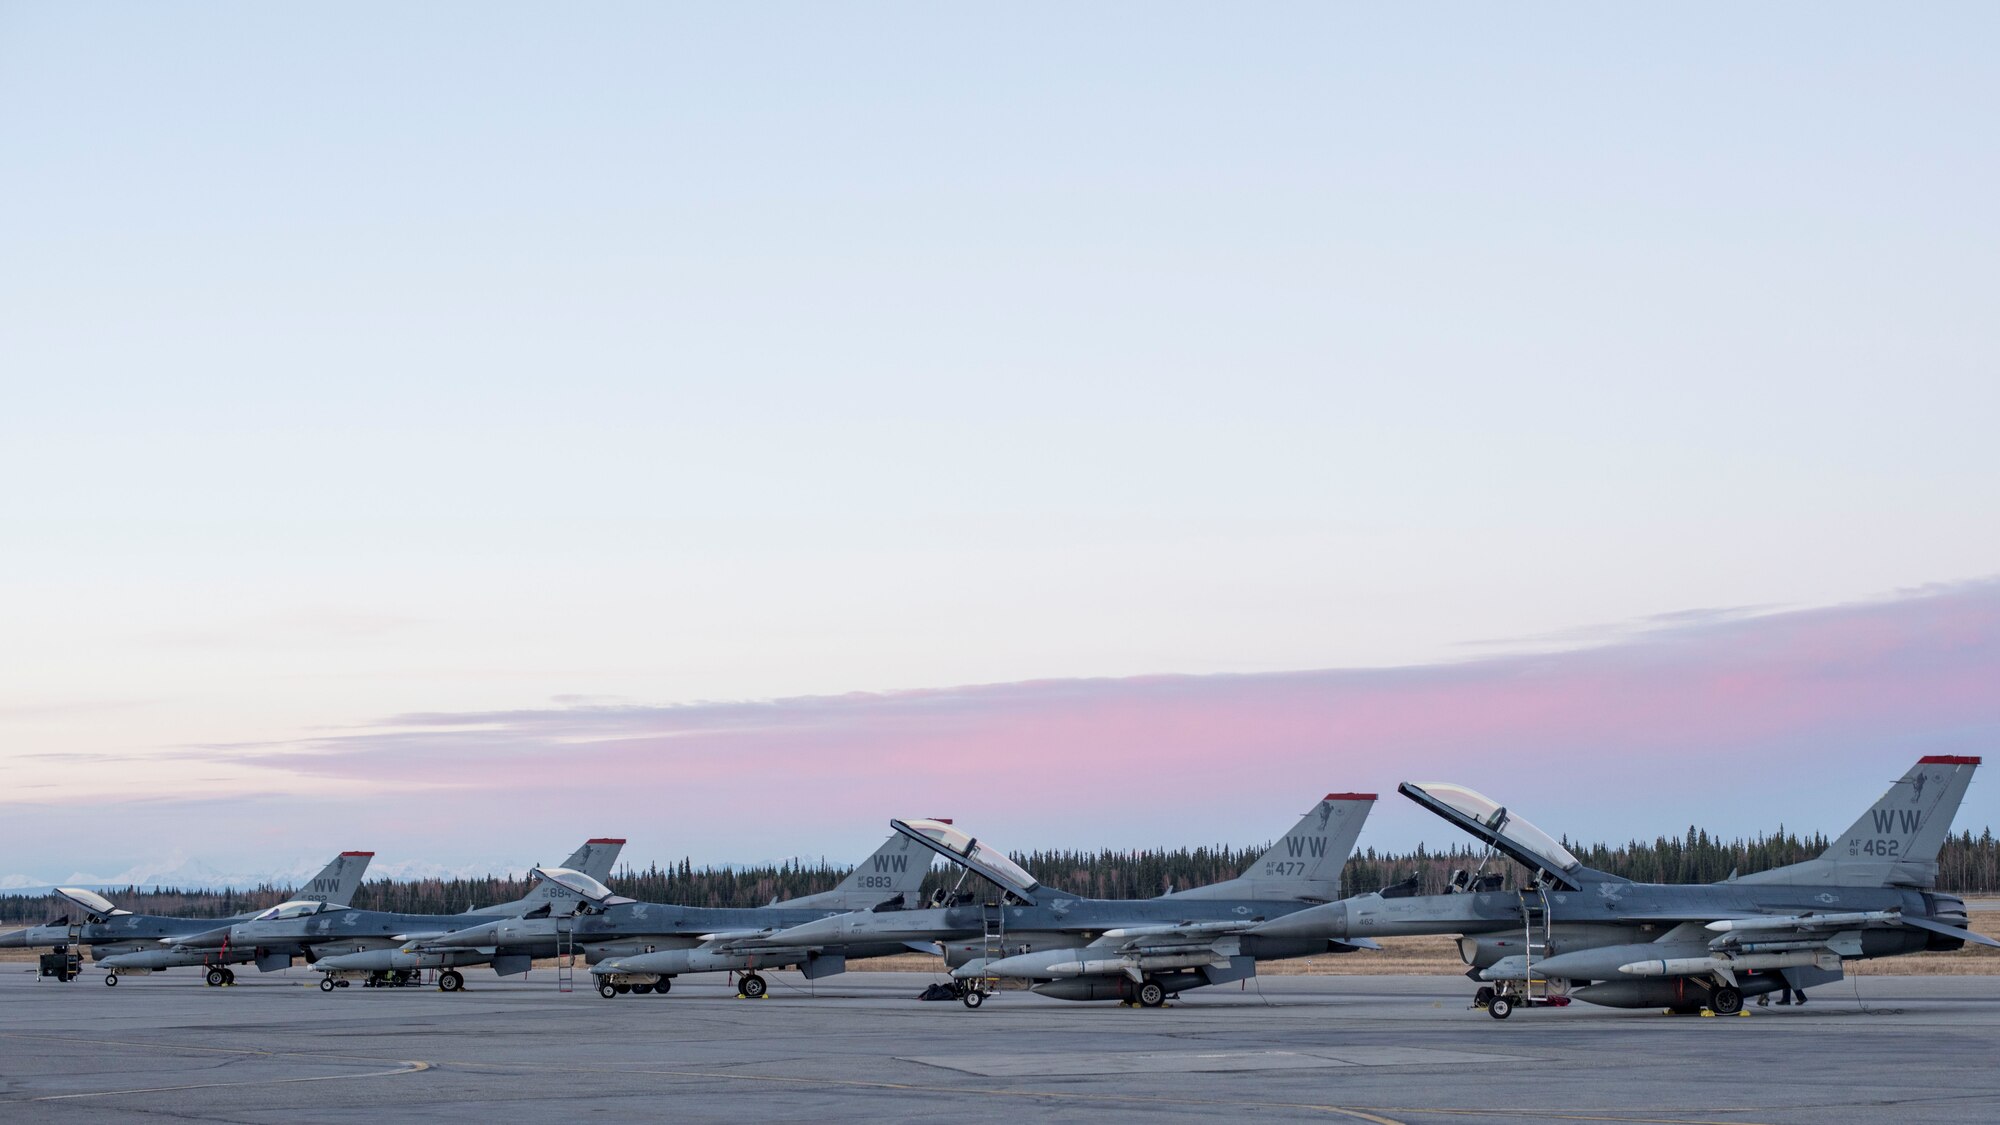 U.S. Air Force F-16 Fighting Falcons with the 13th Fighter Squadron sit on a runway during Exercise Red Flag-Alaska 19-1, at Eielson Air Force Base, Alaska, Oct. 6, 2018. RF-A 19-1, held Oct. 4 to 19, exposes all parties to combat-like scenarios to familiarize members with high-intensity, fast-paced operations to improve interoperability among allies. (U.S. Air Force photo by Airman 1st Class Collette Brooks)